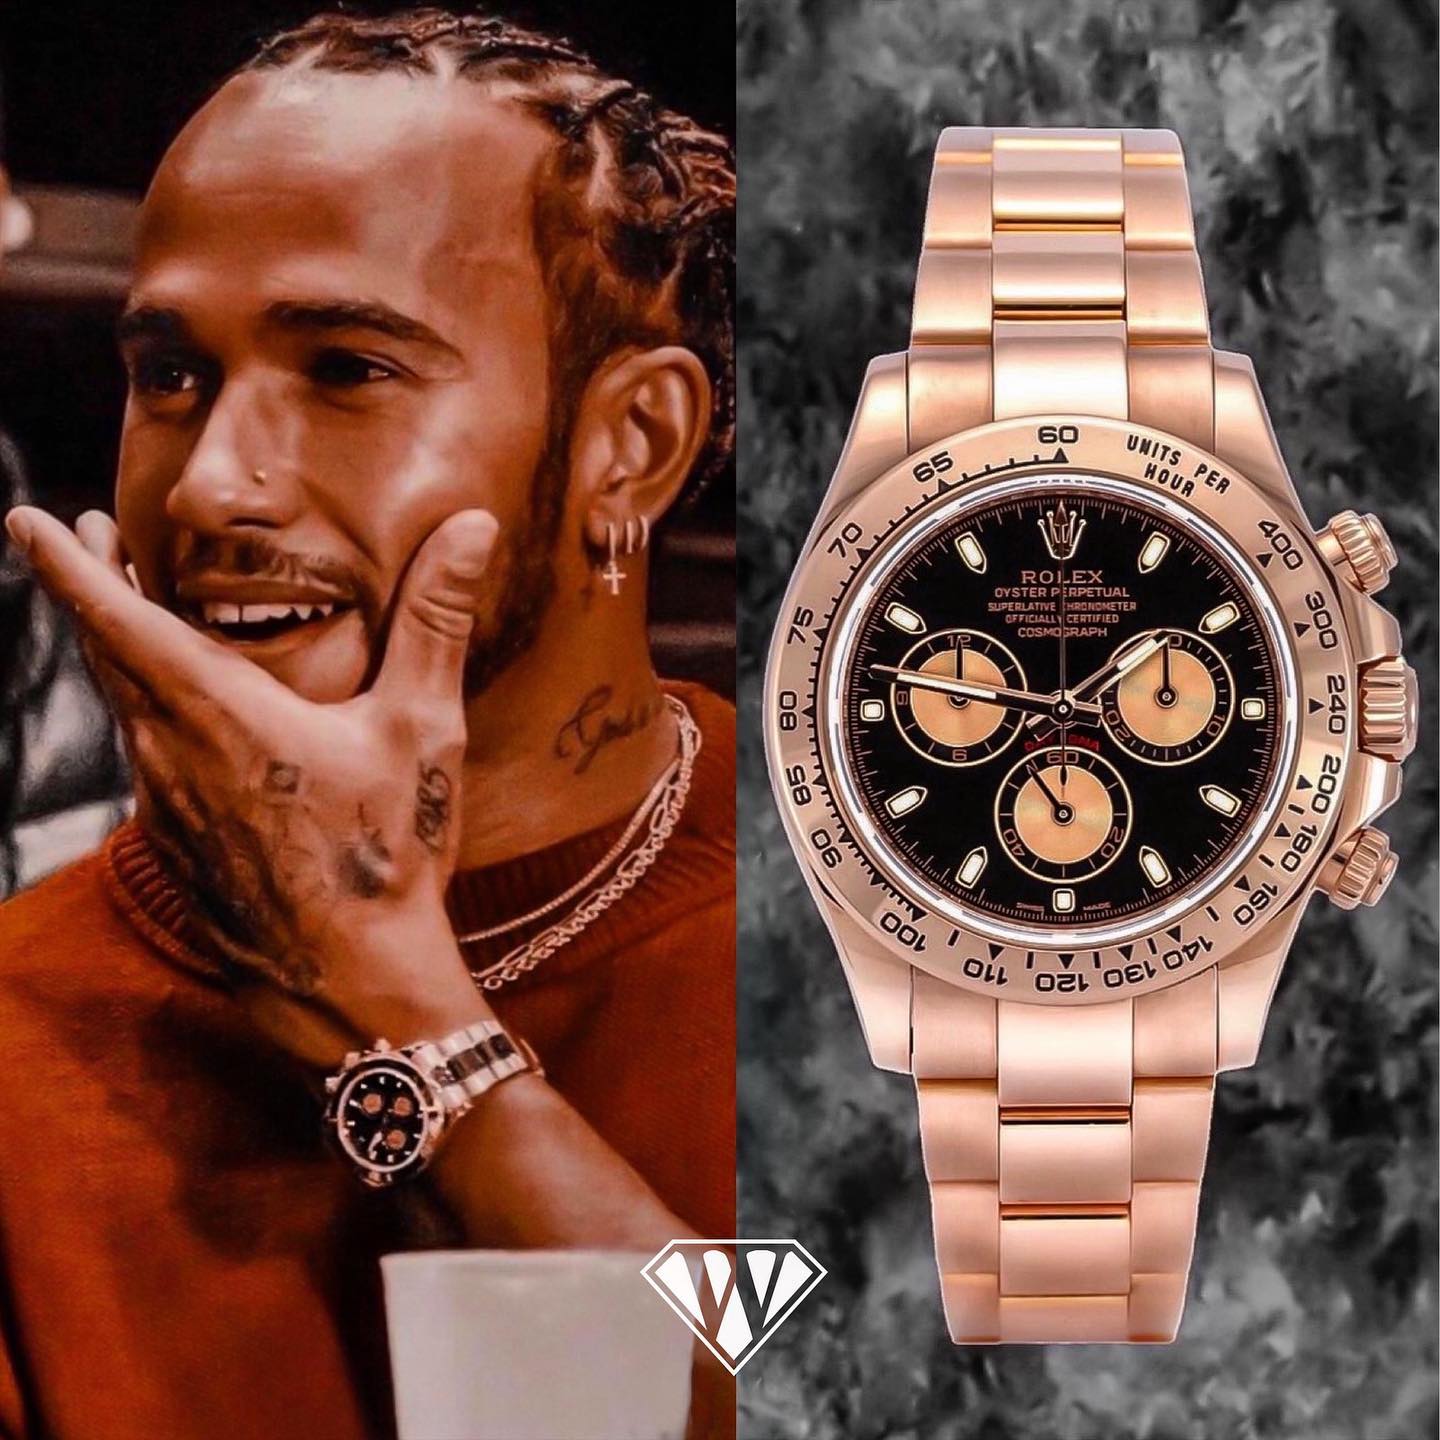 Always with us V' - Lewis Hamilton remembers Louis Vuitton